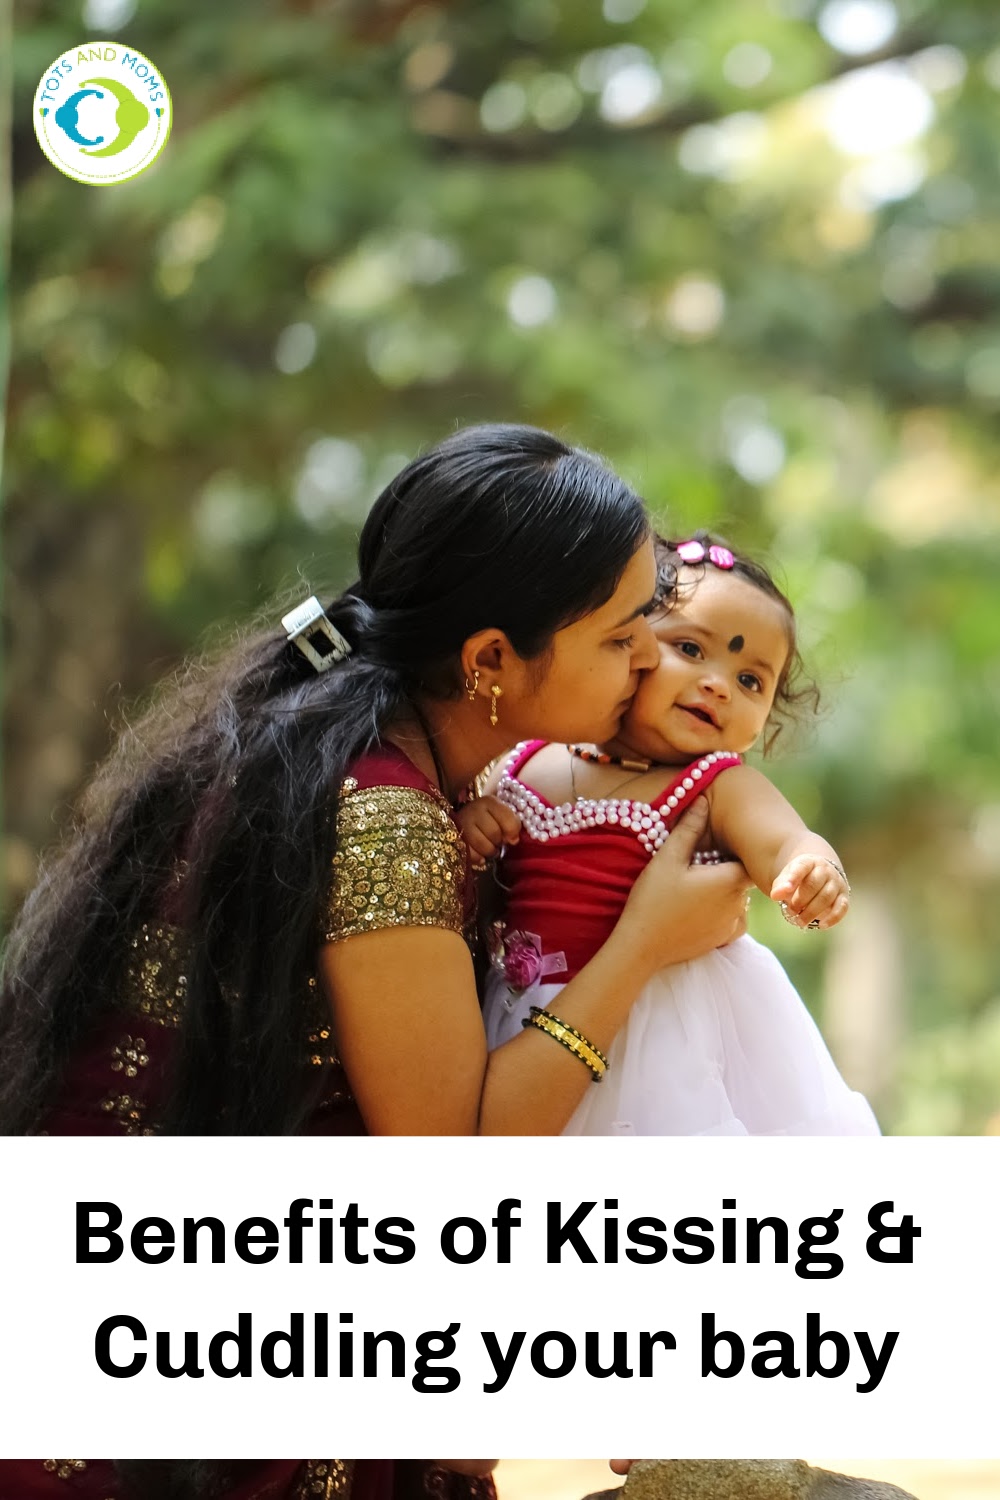 Benefits of Kissing your baby Benefits of cuddling your baby emotional wellbeing of the child emotional wellbeing of the baby emotional well being of the parents mentally strong babies physically strong babies benefits of kissing and cuddling what it means kissing and cuddling your baby